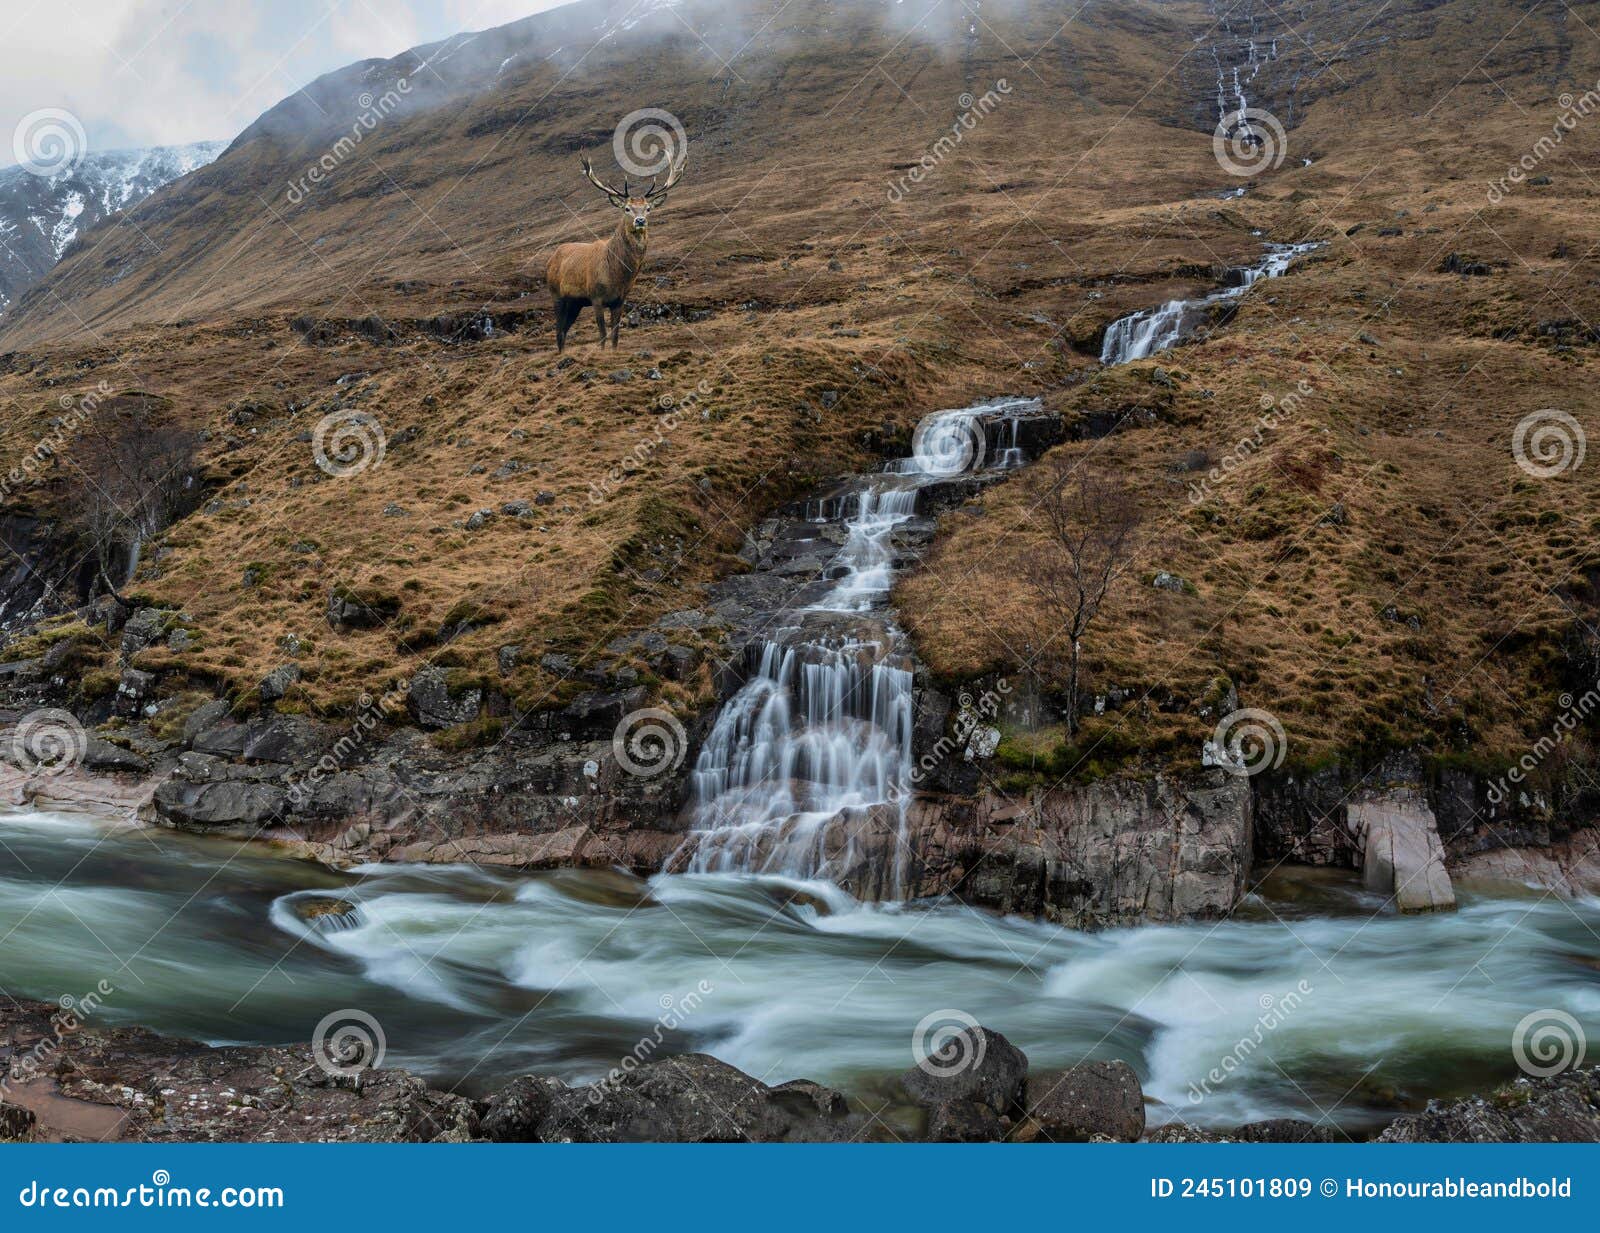 composite image of red deer stag in stunning winter landscape image of river etive and skyfall etive waterfalls in scottish